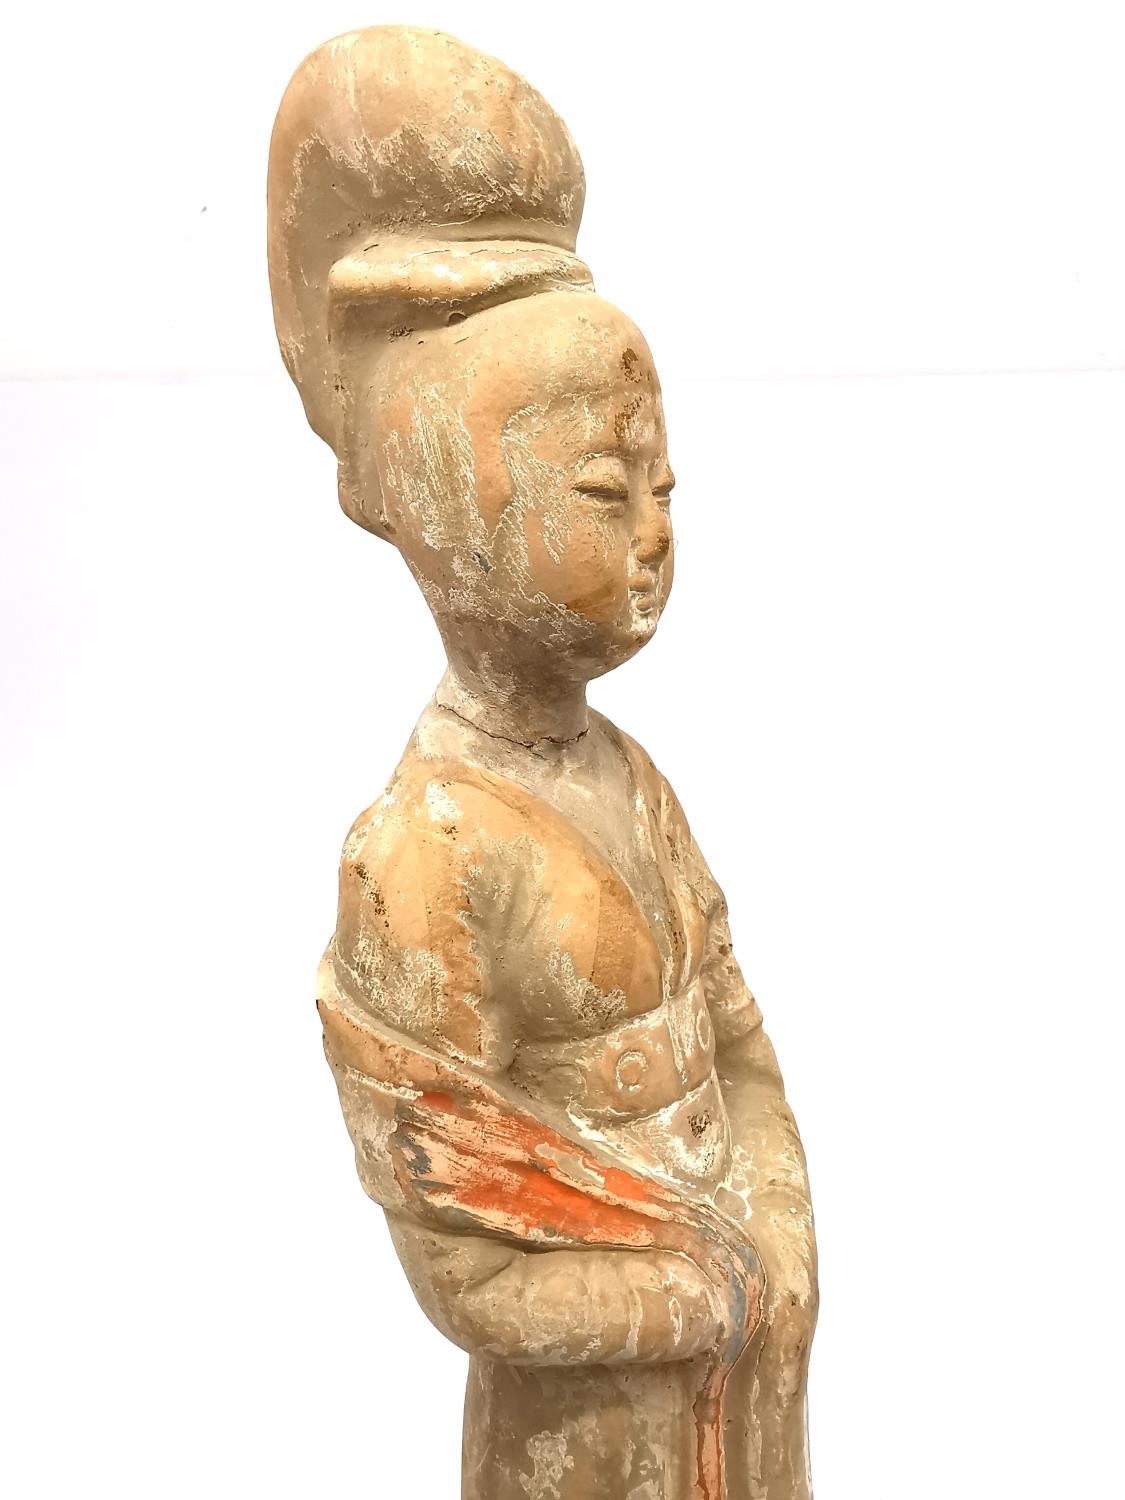 Two Chinese Han-style painted terracotta figurines, one of a female attendant and one of a - Image 18 of 20